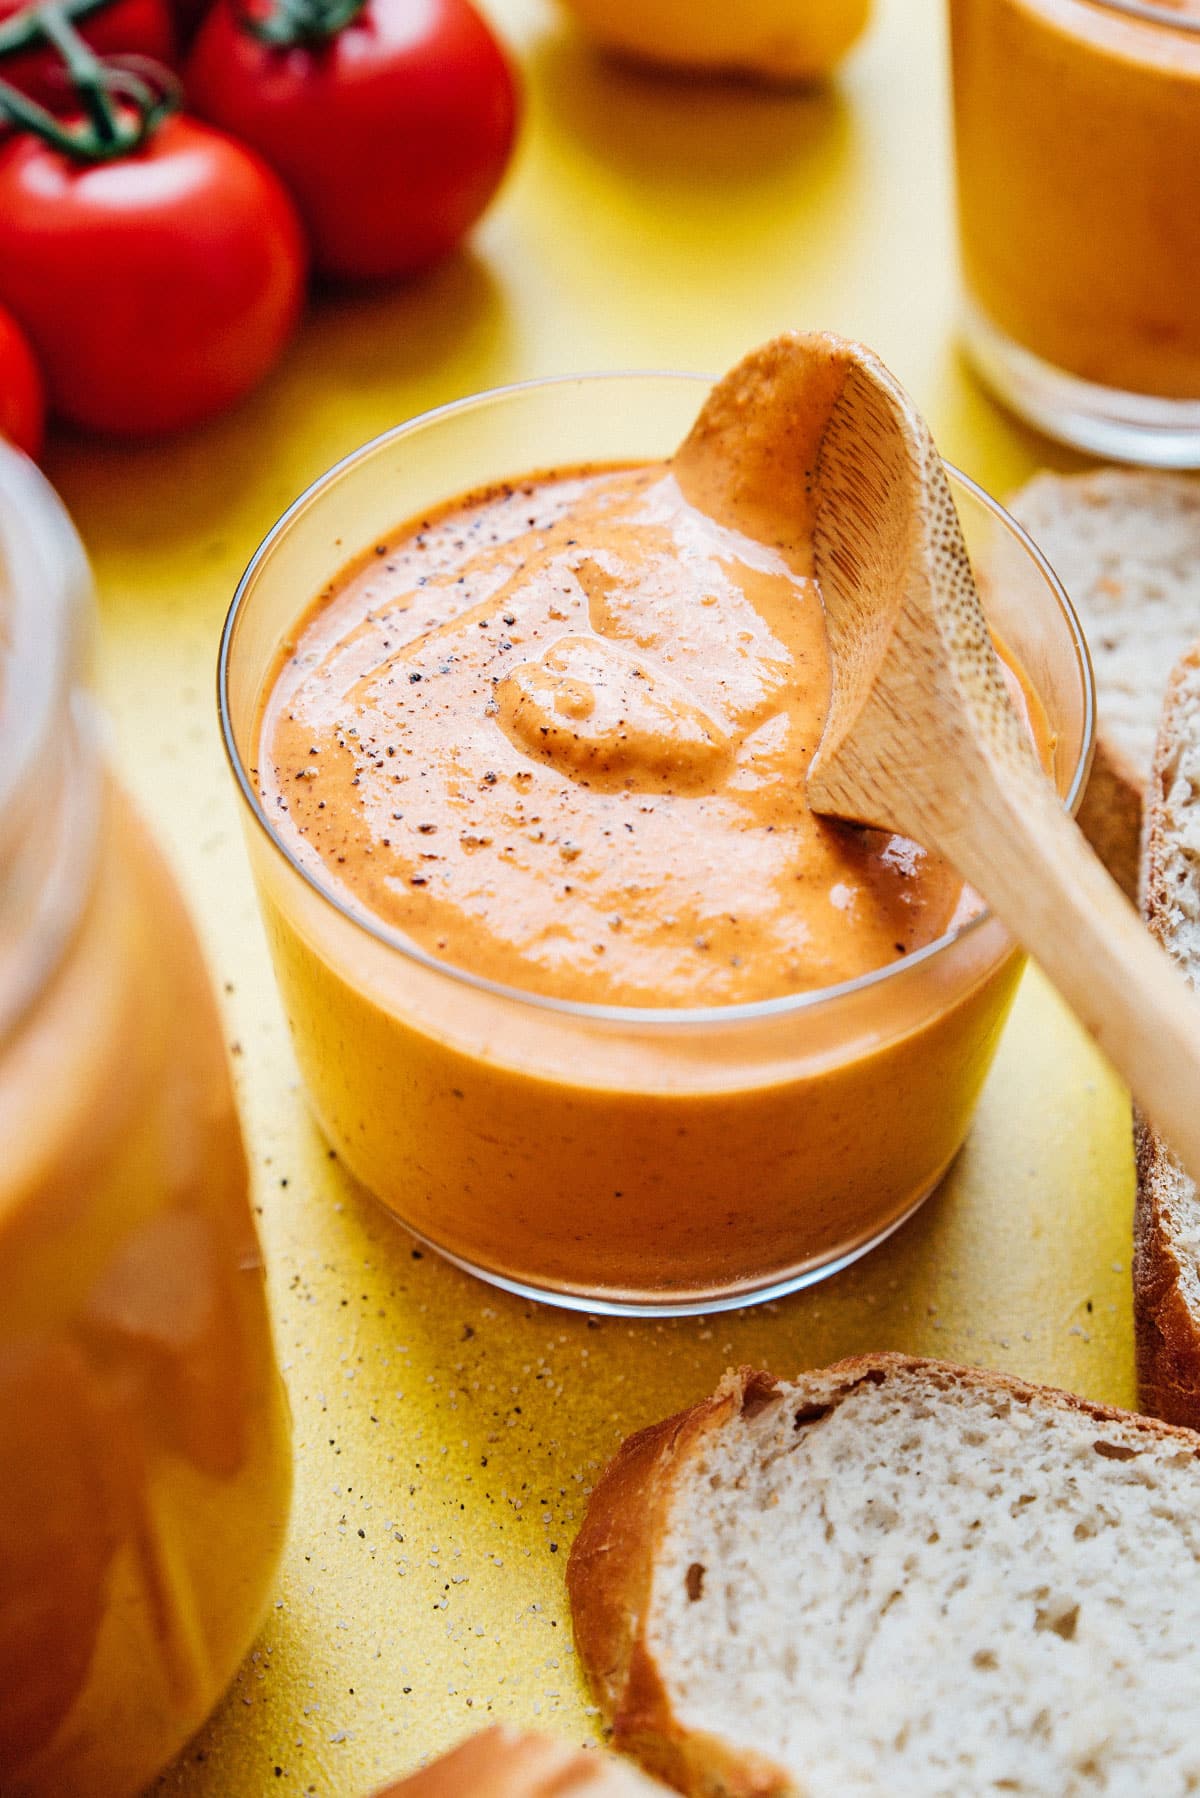 Romesco sauce recipe in a jar with a spoon.